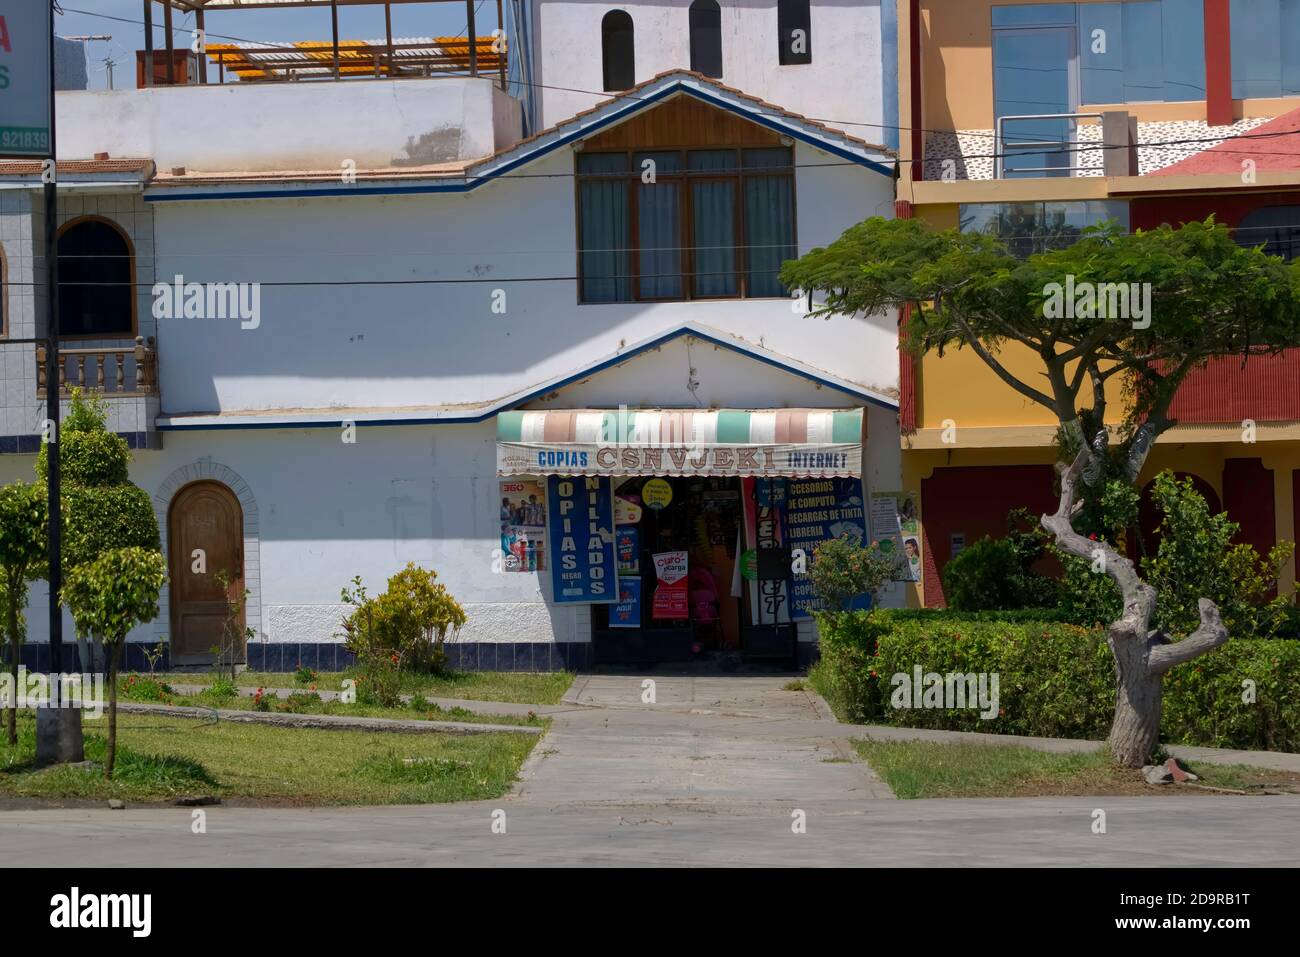 New Chimbote, Peru - April 18, 2018: Front of shop indicating photocopy and internet services with pavement and grass to foreground Stock Photo